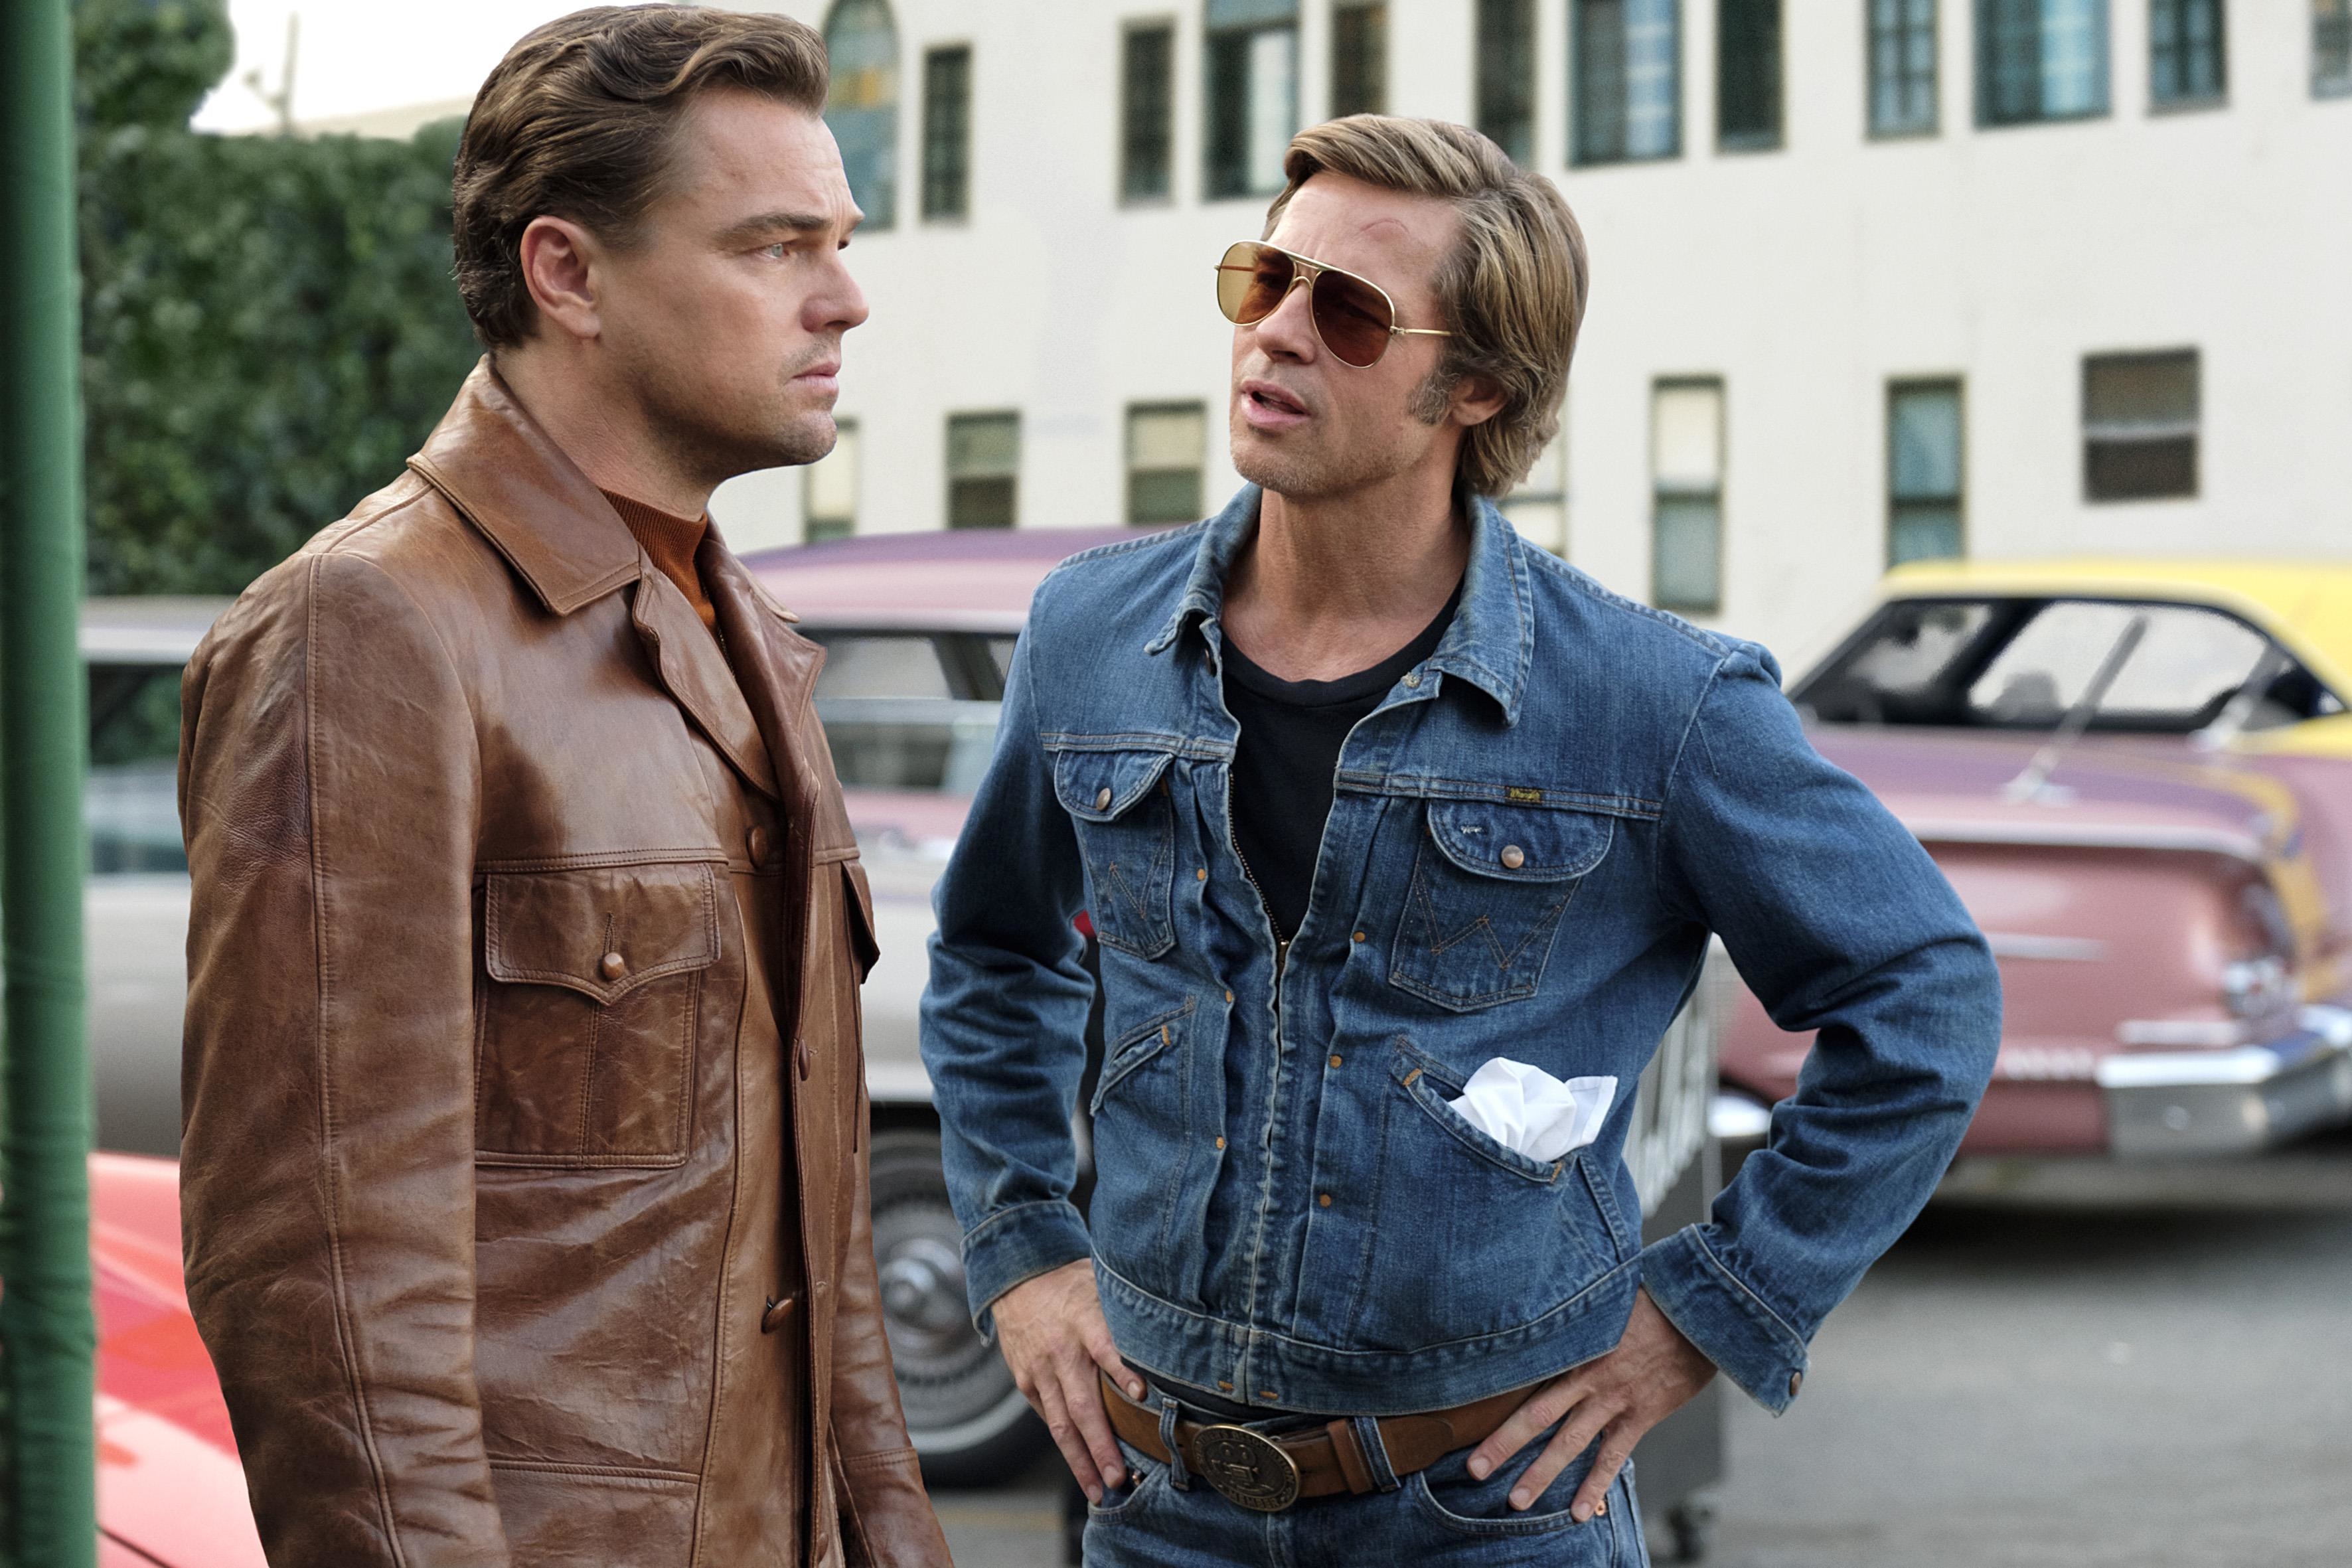 Image du film Once Upon a Time... in Hollywood d69f21b5-de16-4237-ac40-6c71dfe451f3